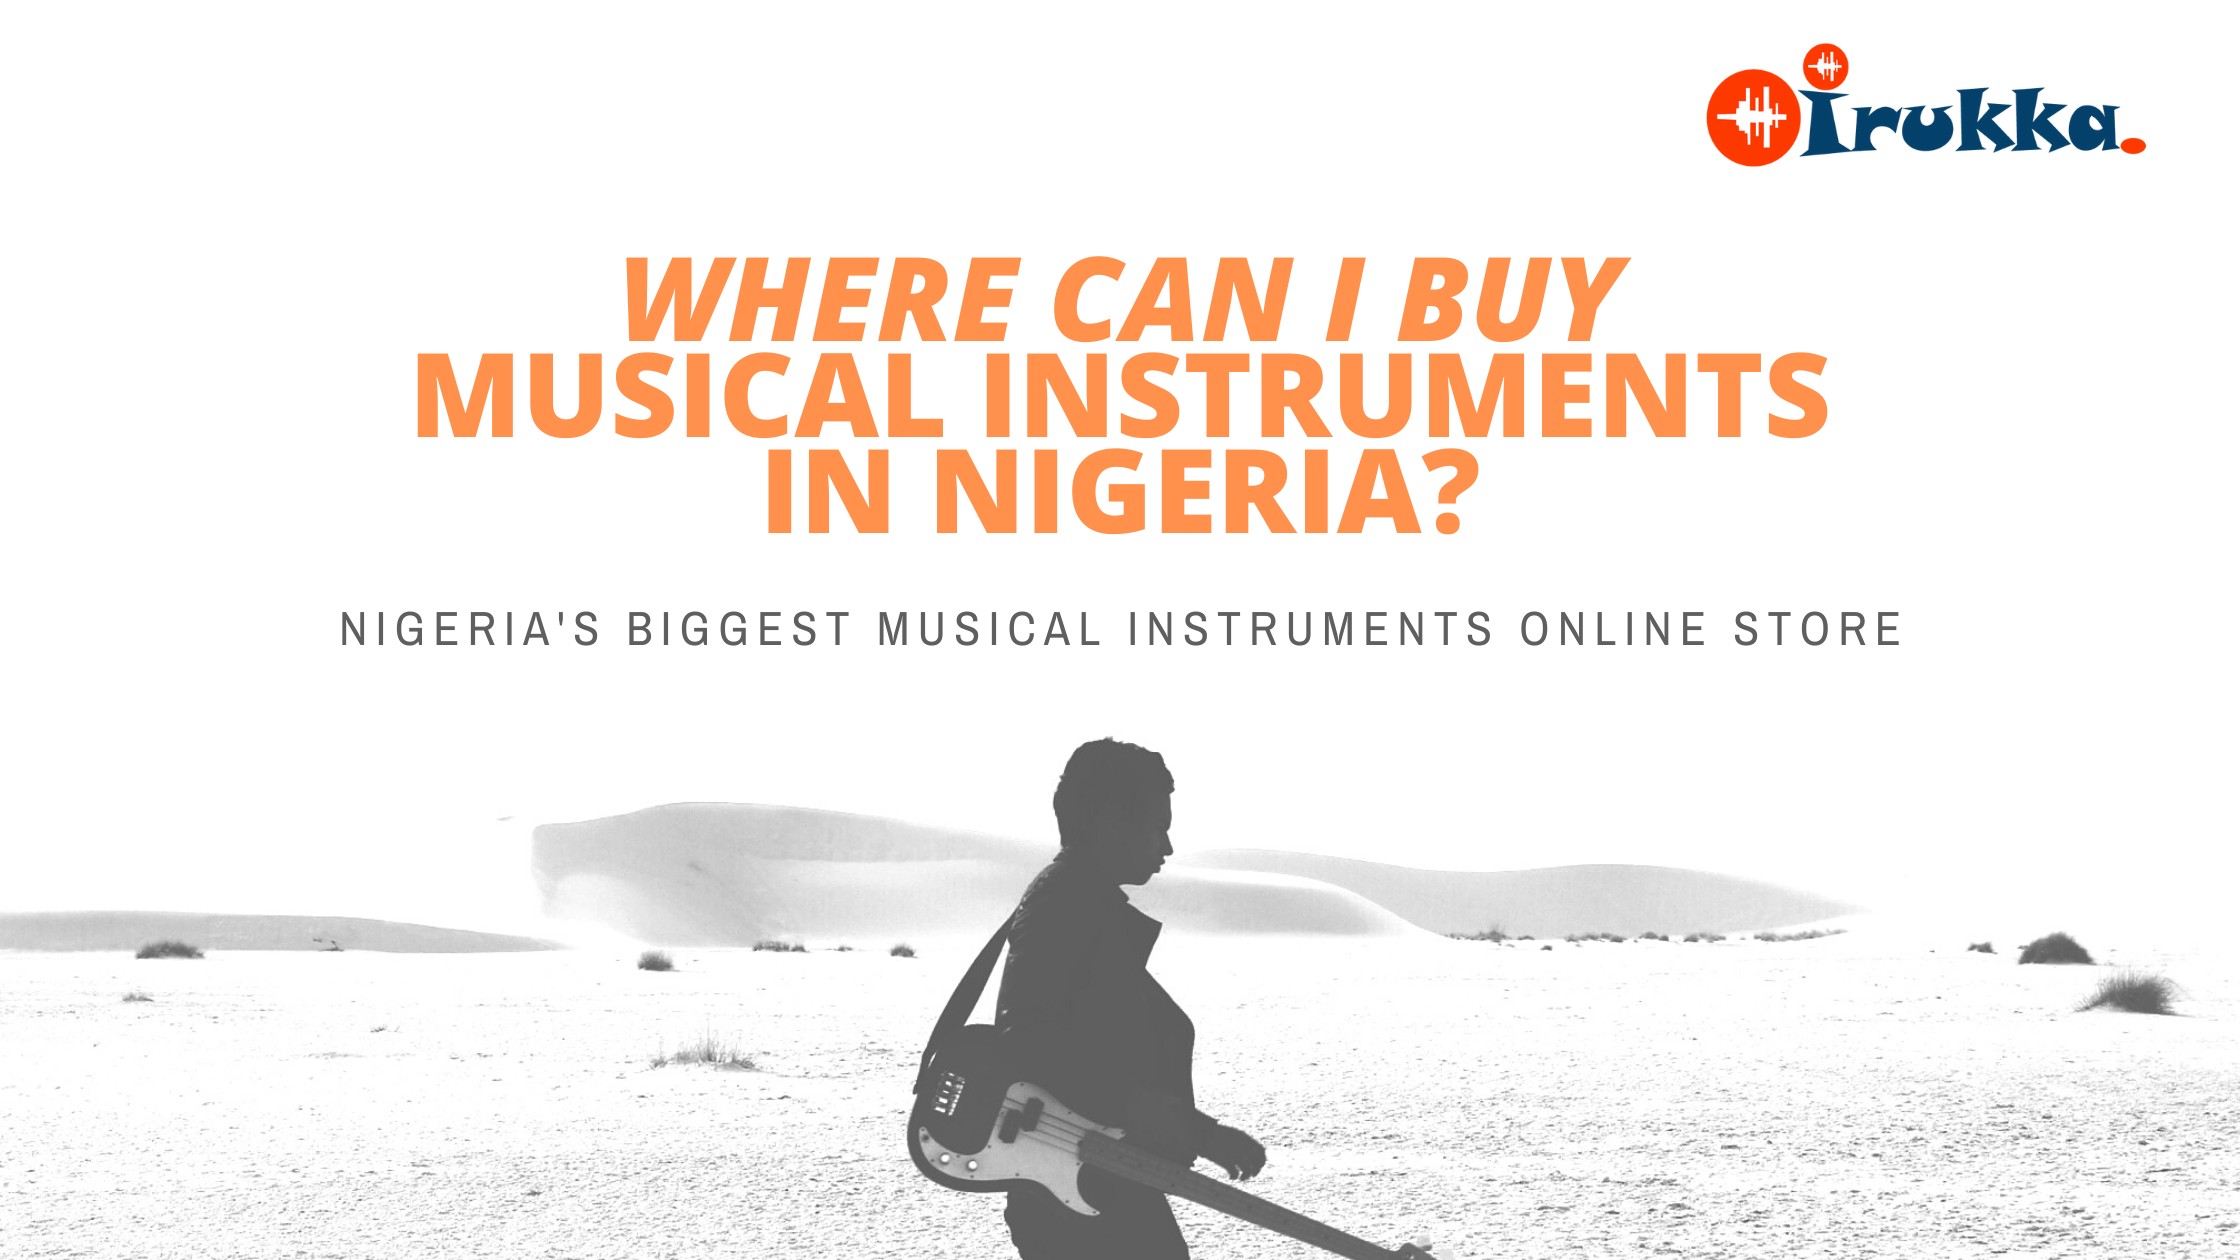 WHERE CAN I BUY MUSICAL INSTRUMENTS IN NIGERIA, NIGERIA BIGGEST ONLINE MUSICAL INSTRUMENTS STORE, SOUND EQUIPMENT STORE ONLINE, AUDIO EQUIPMENT STORE ONLINE, SPEAKER SHOP ONLINE, BEST INSTRUMENTS FOR DJ, DJ STORE ONLINE